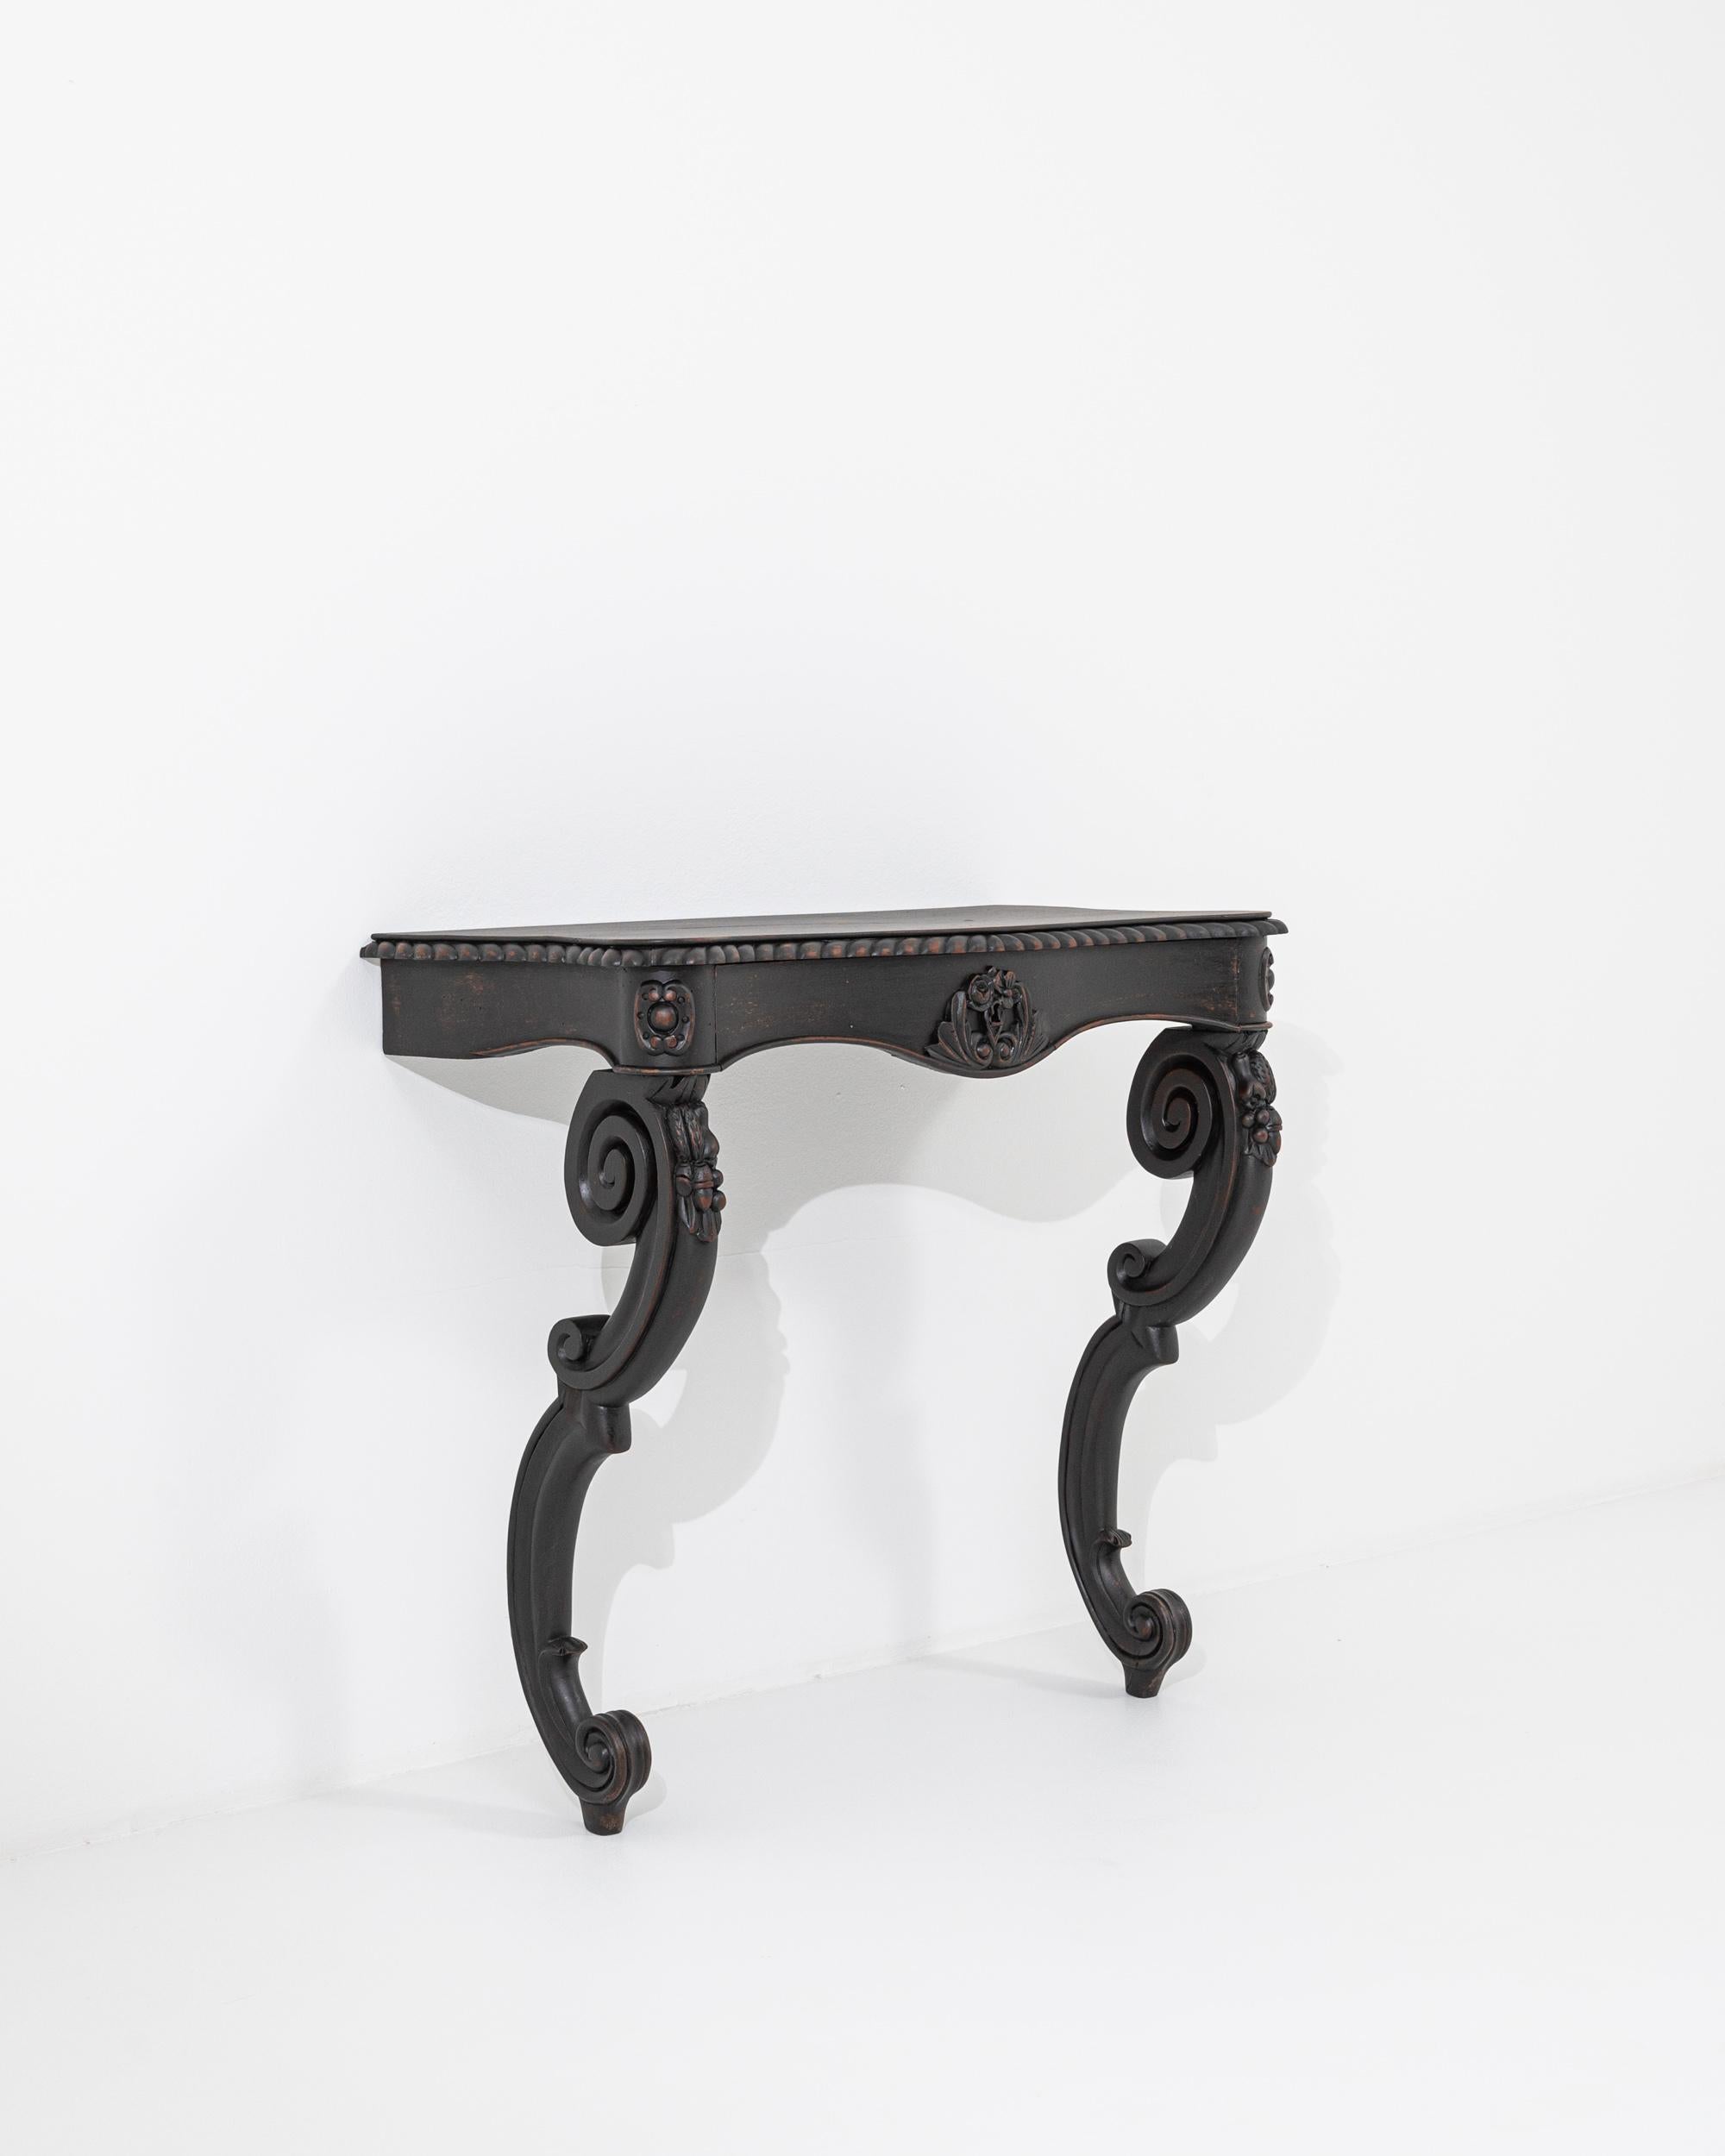 A wooden console table created in 19th century France. This console table has a unique gravity, constructed to appear as though it is emerging right out of the wall, with its spiraling, carved legs coming up and over to rest gracefully upon the